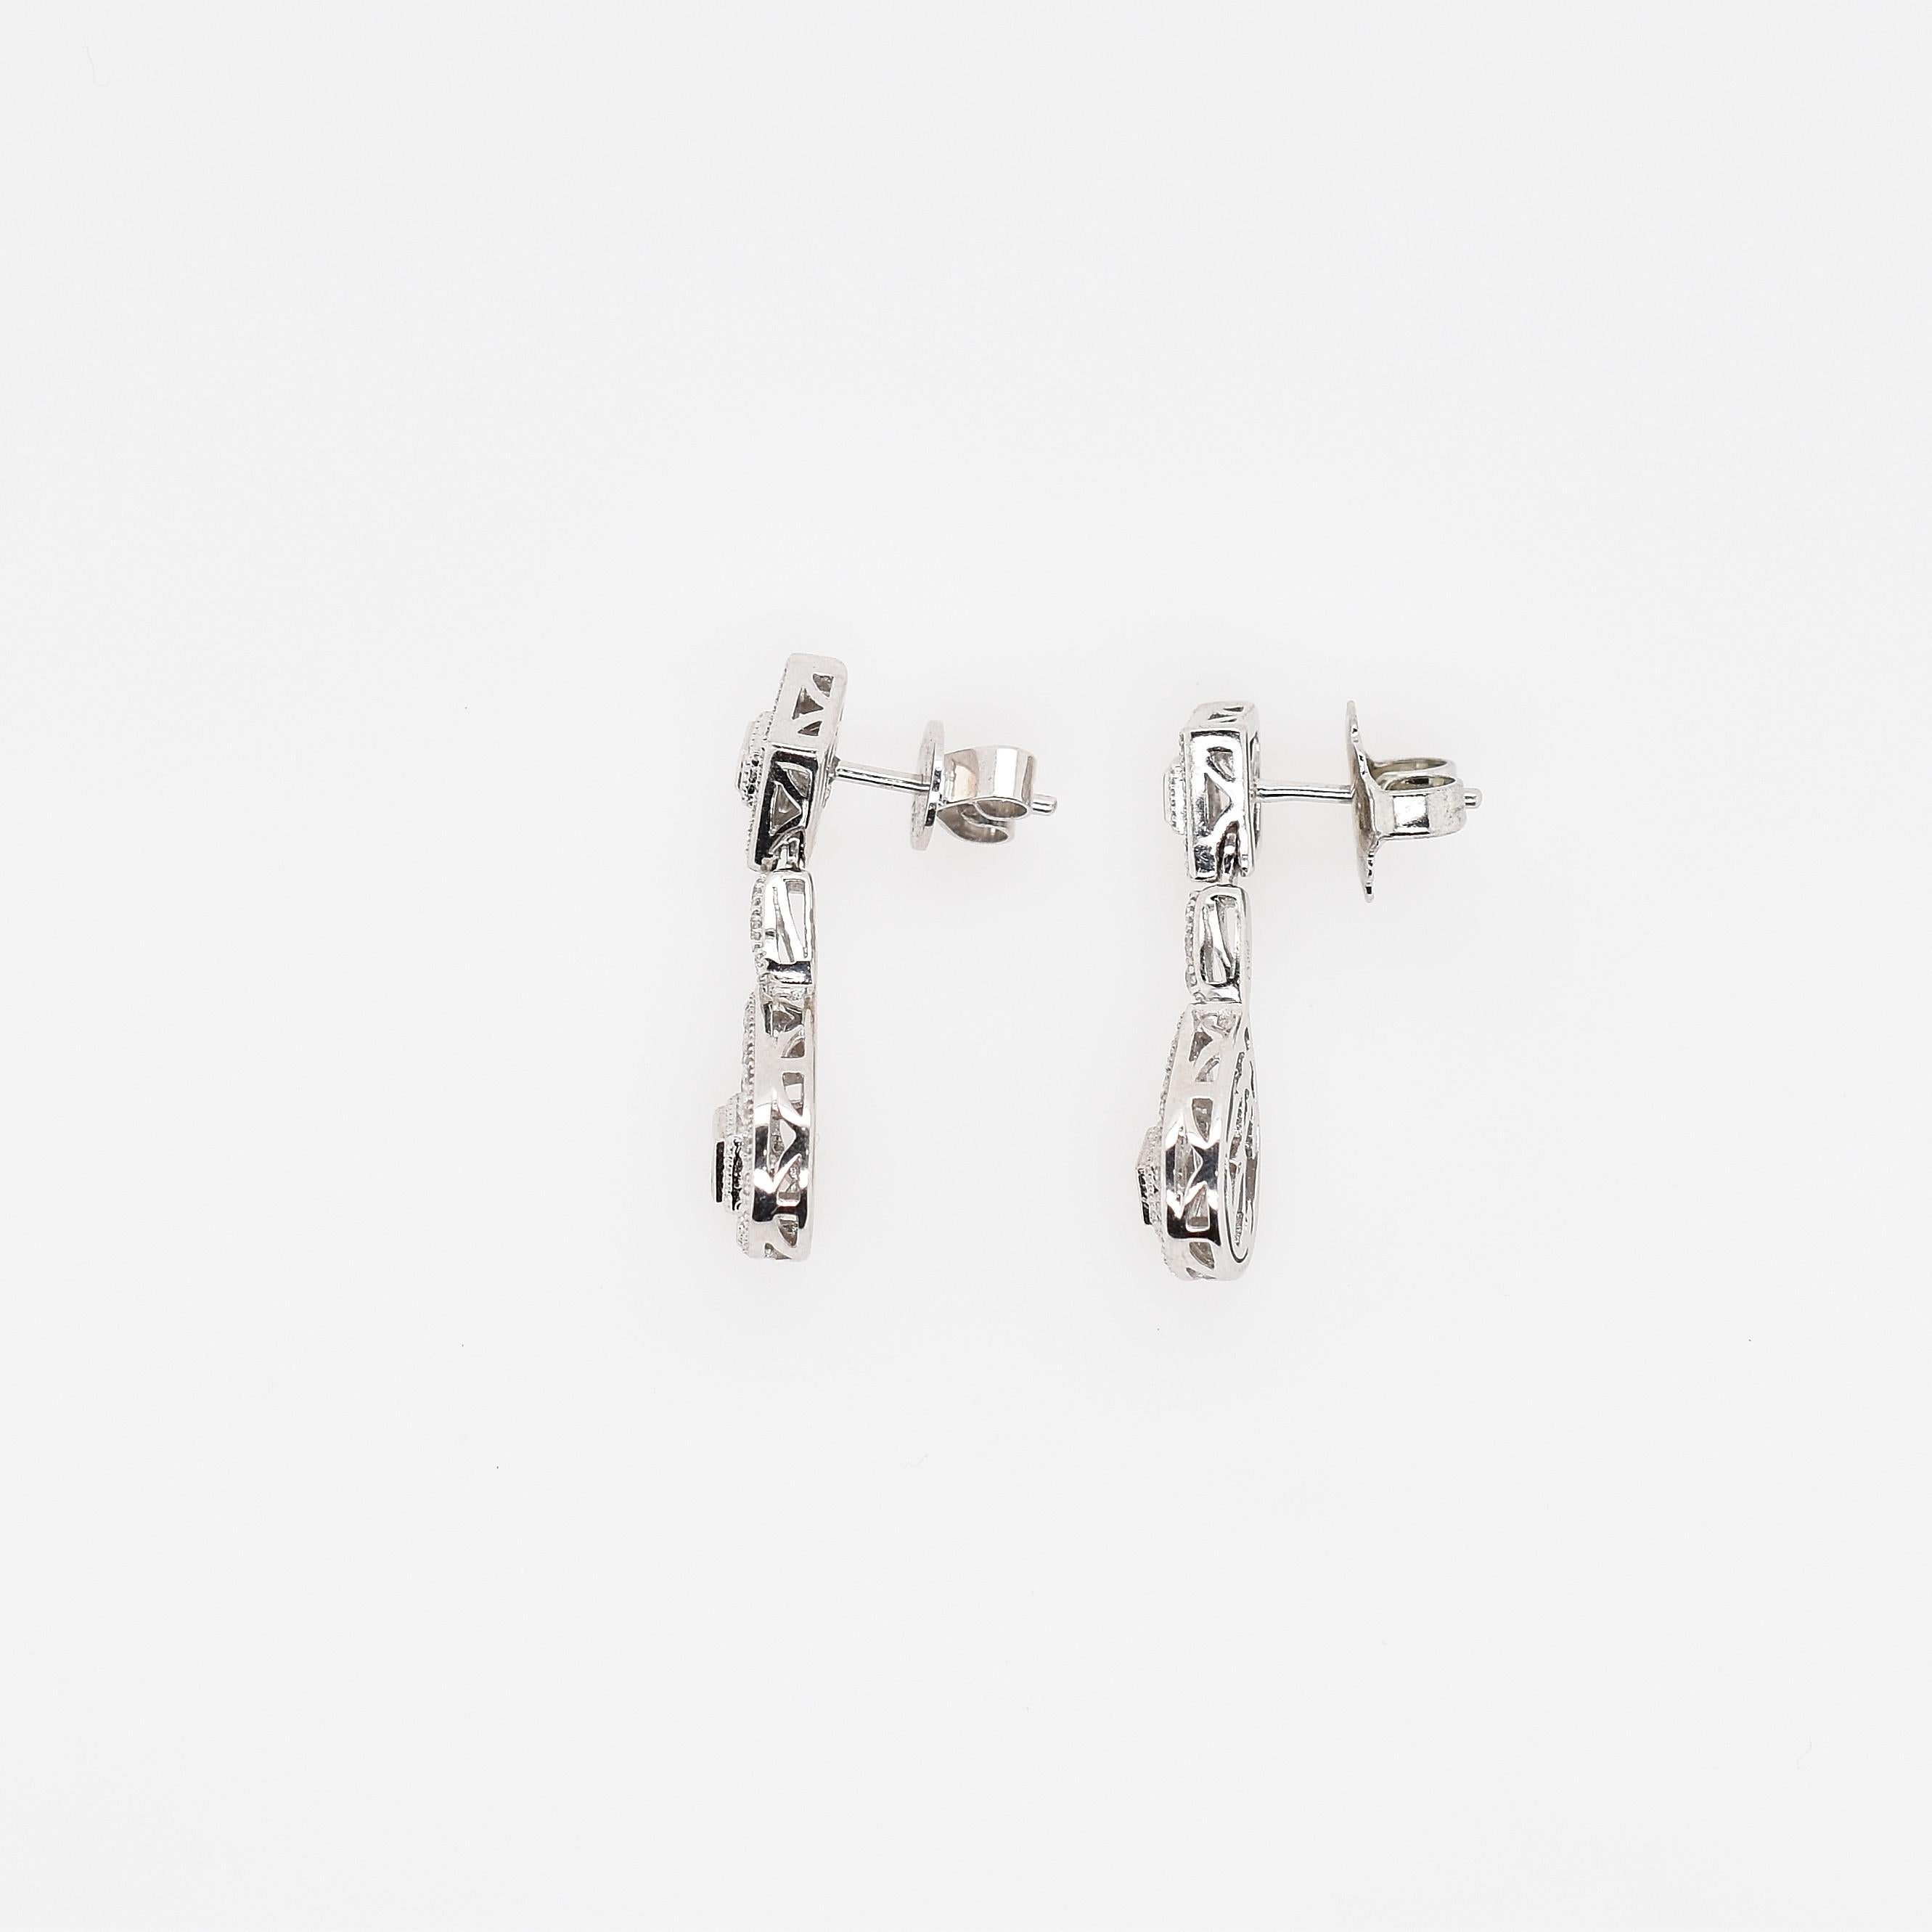 18ct White Gold Diamond Cluster Drop Earrings with total diamond weight 1.00ct IJ SI2.
There are 4 princess cut diamonds as centre feature in each cluster, surrounded by briliant cut diamonds in a mille grained setting.
They are post and butterfly  